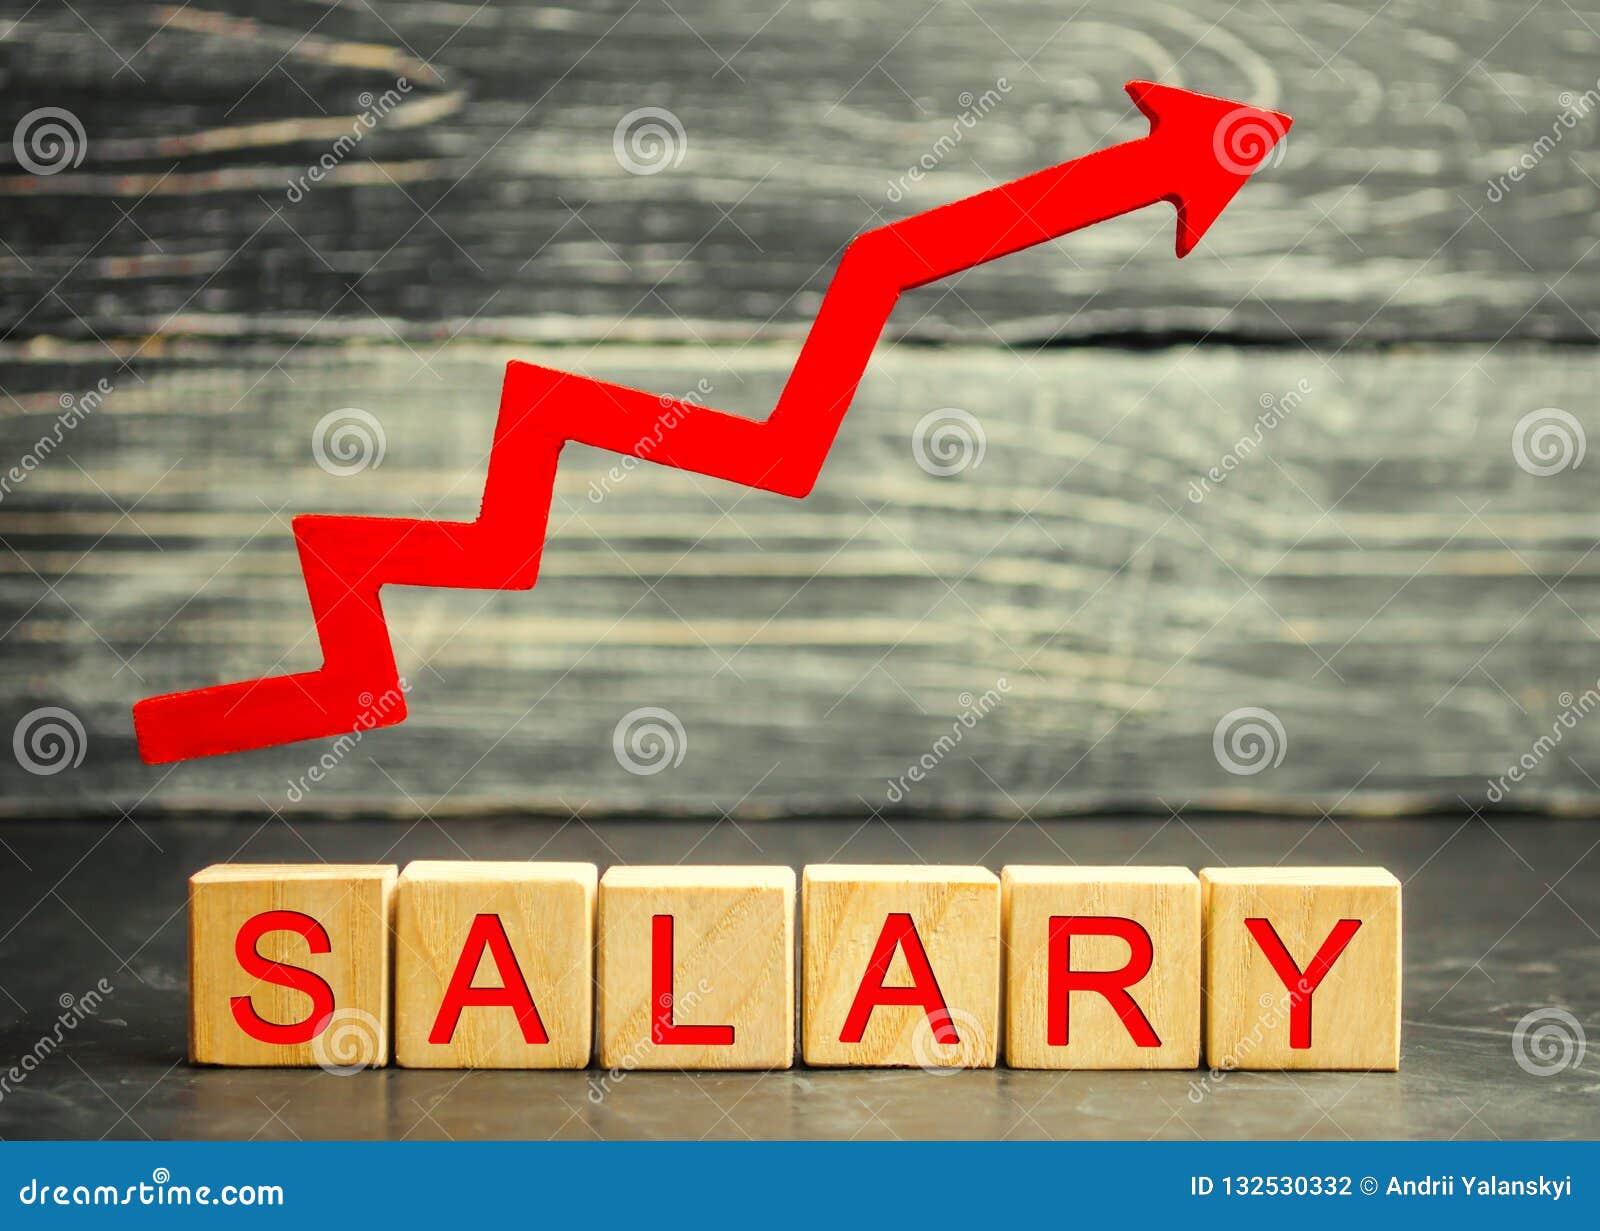 the inscription salary and the red arrow up. increase of salary, wage rates. promotion, career growth. raising the standard of